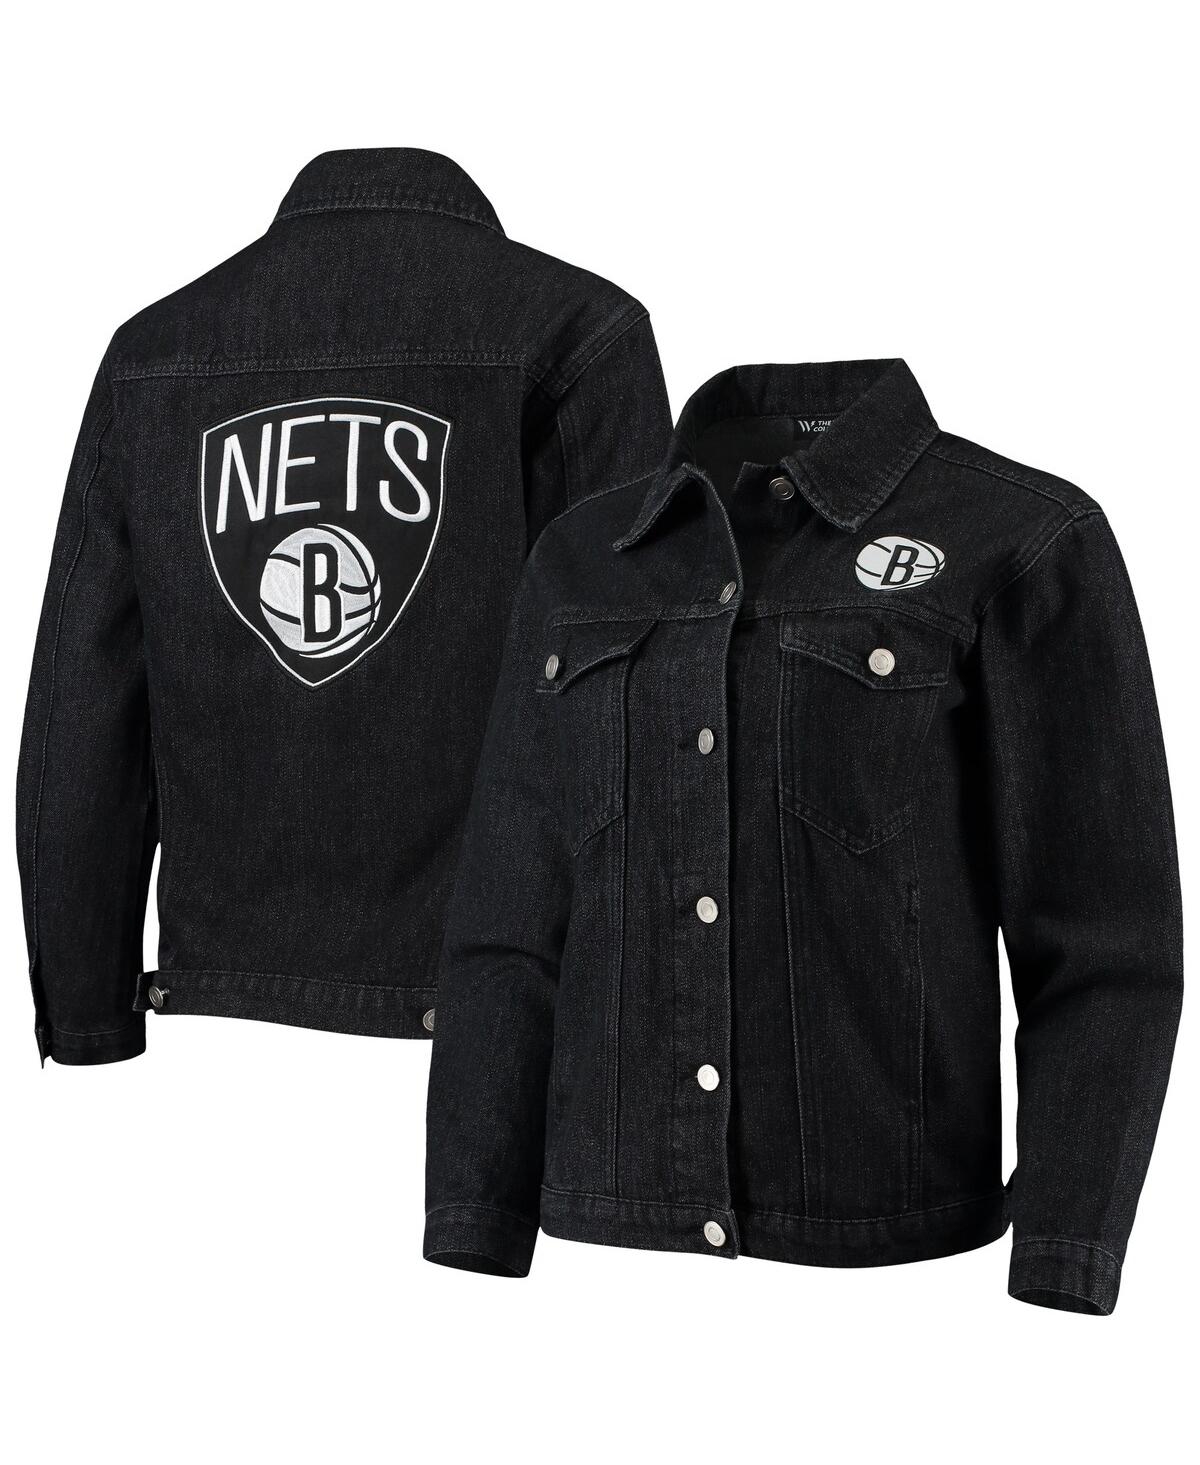 Women's The Wild Collective Black Brooklyn Nets Patch Denim Button-Up Jacket - Black